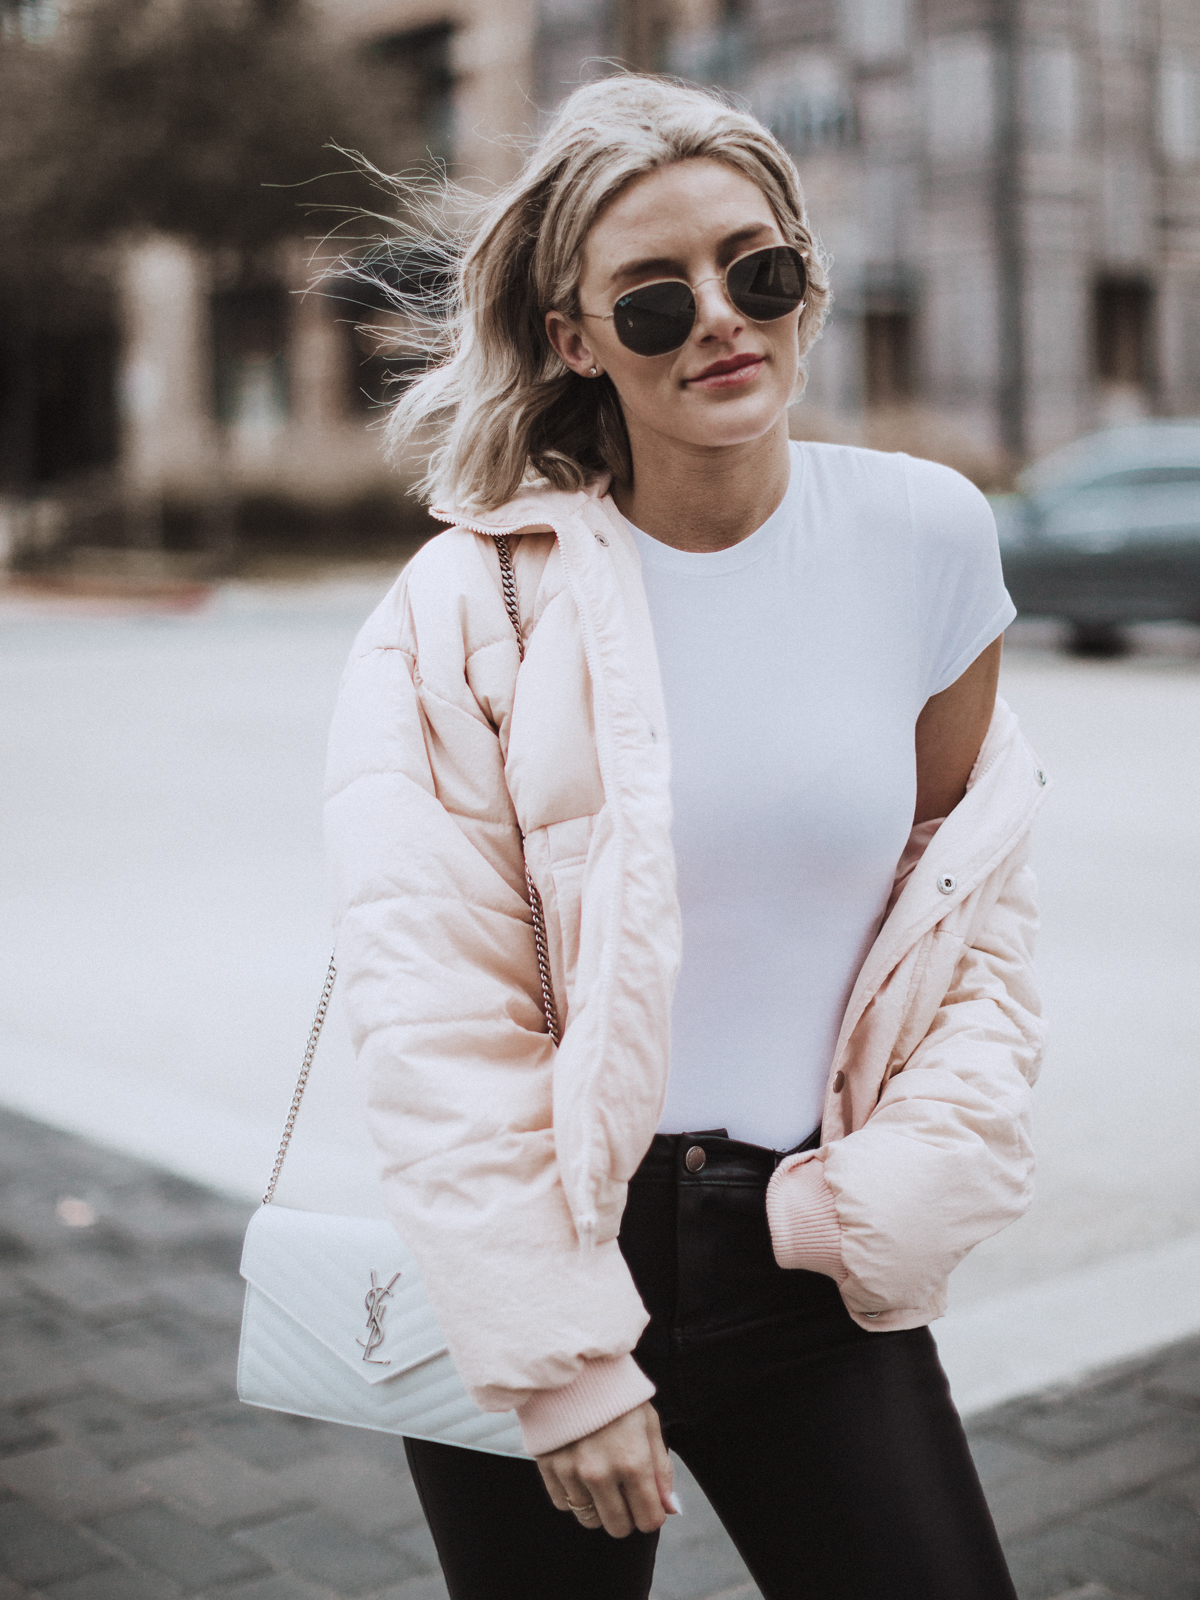 Sage Coralli of So Sage Blog in a free people puffer coat